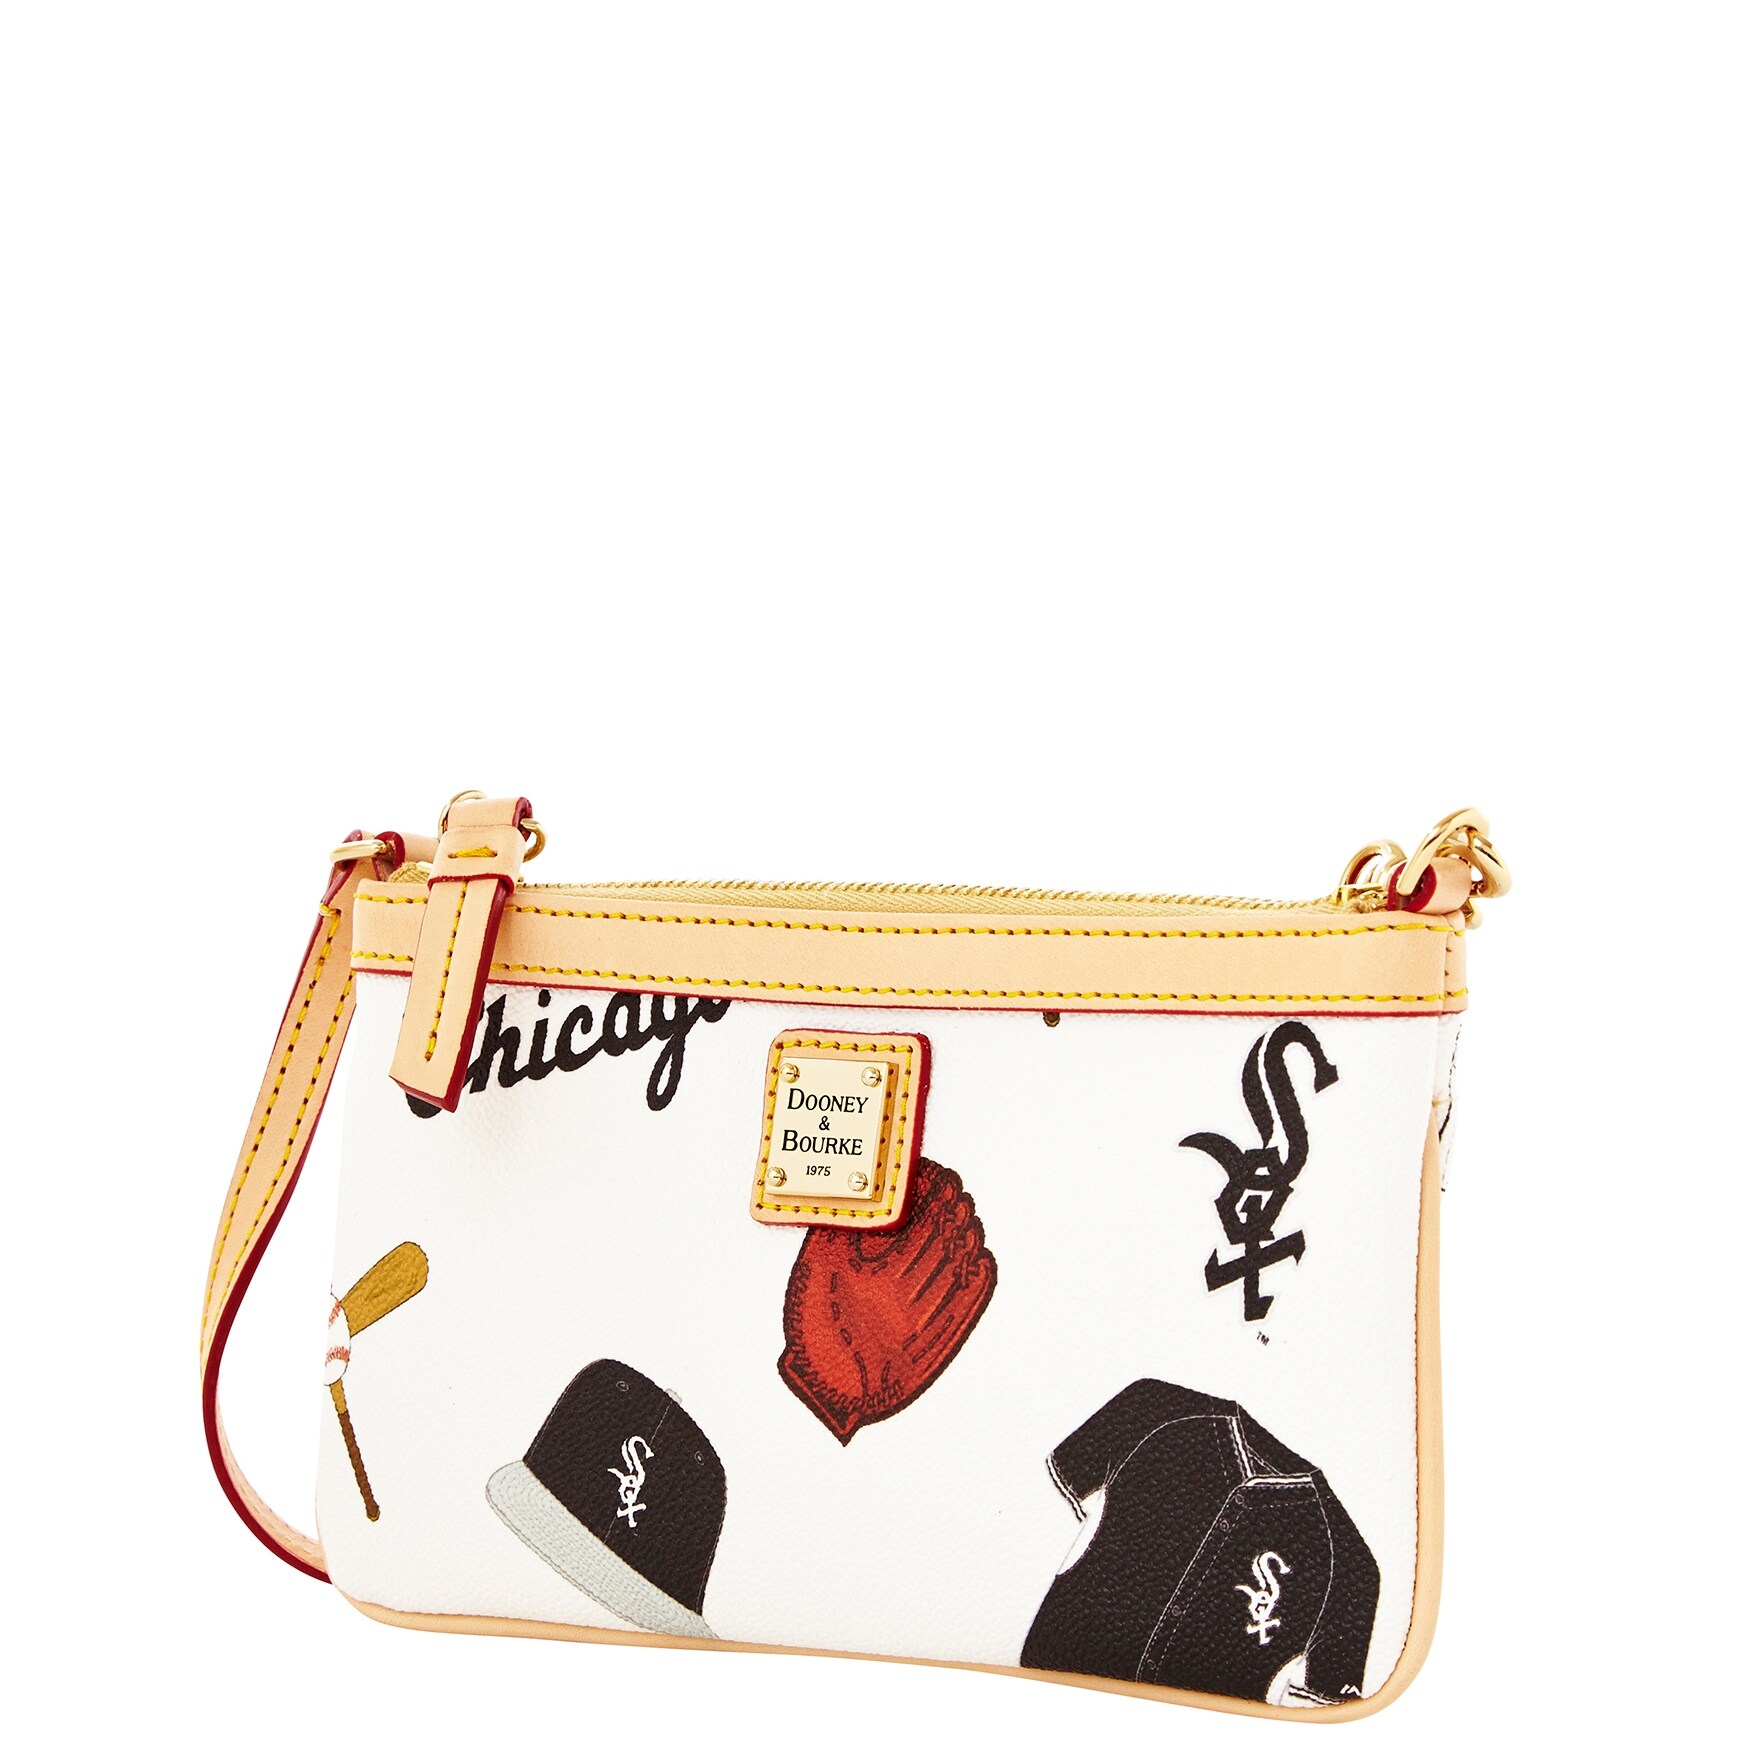 Shop Dooney & Bourke MLB Chicago White Sox Large Slim Wristlet (Introduced  by Dooney & Bourke at $88 in Feb 2014) - Overstock - 17684282